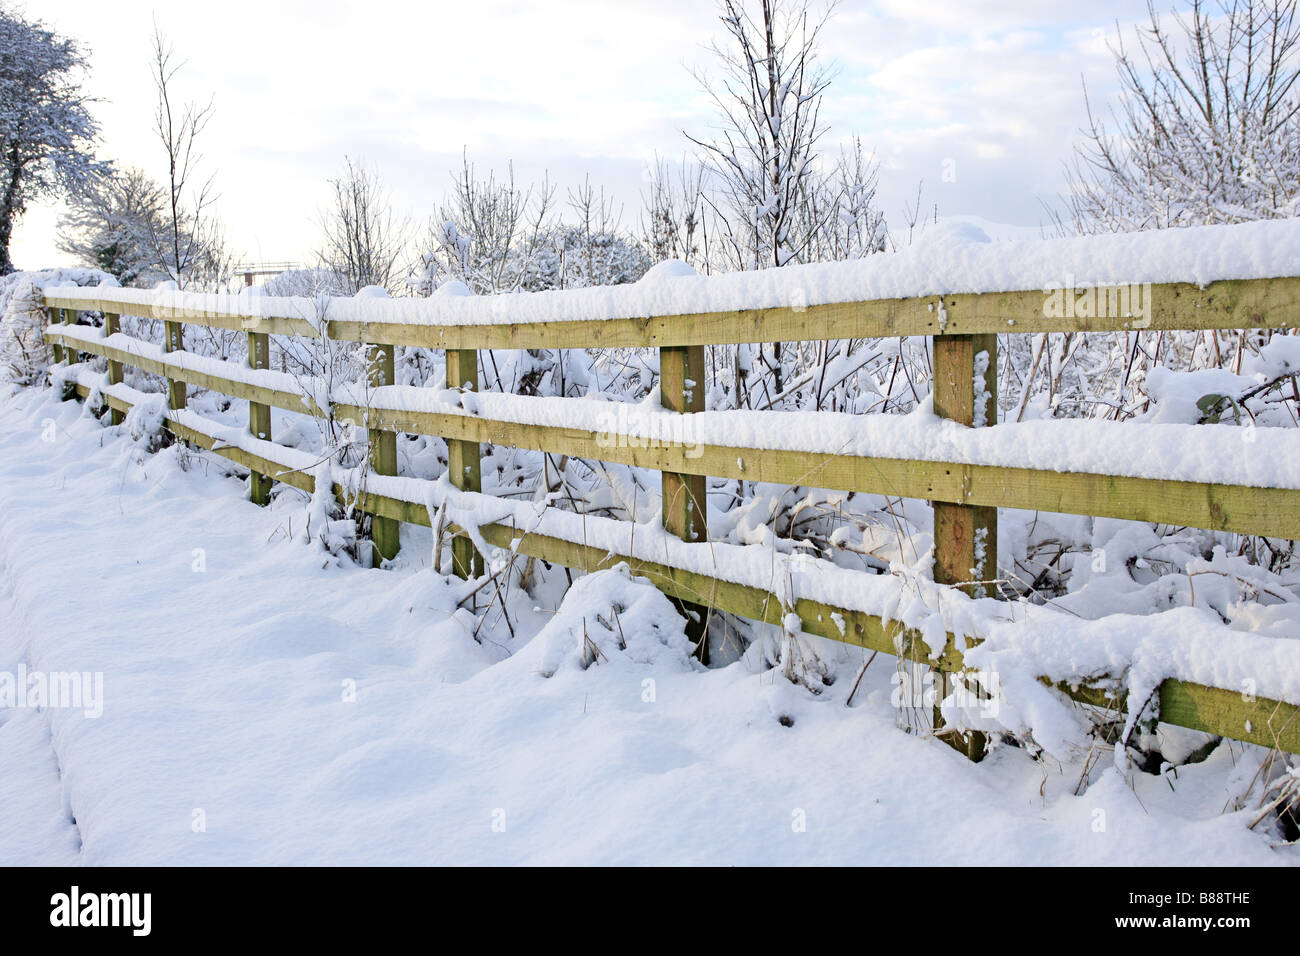 A snow covered ranch fence Stock Photo